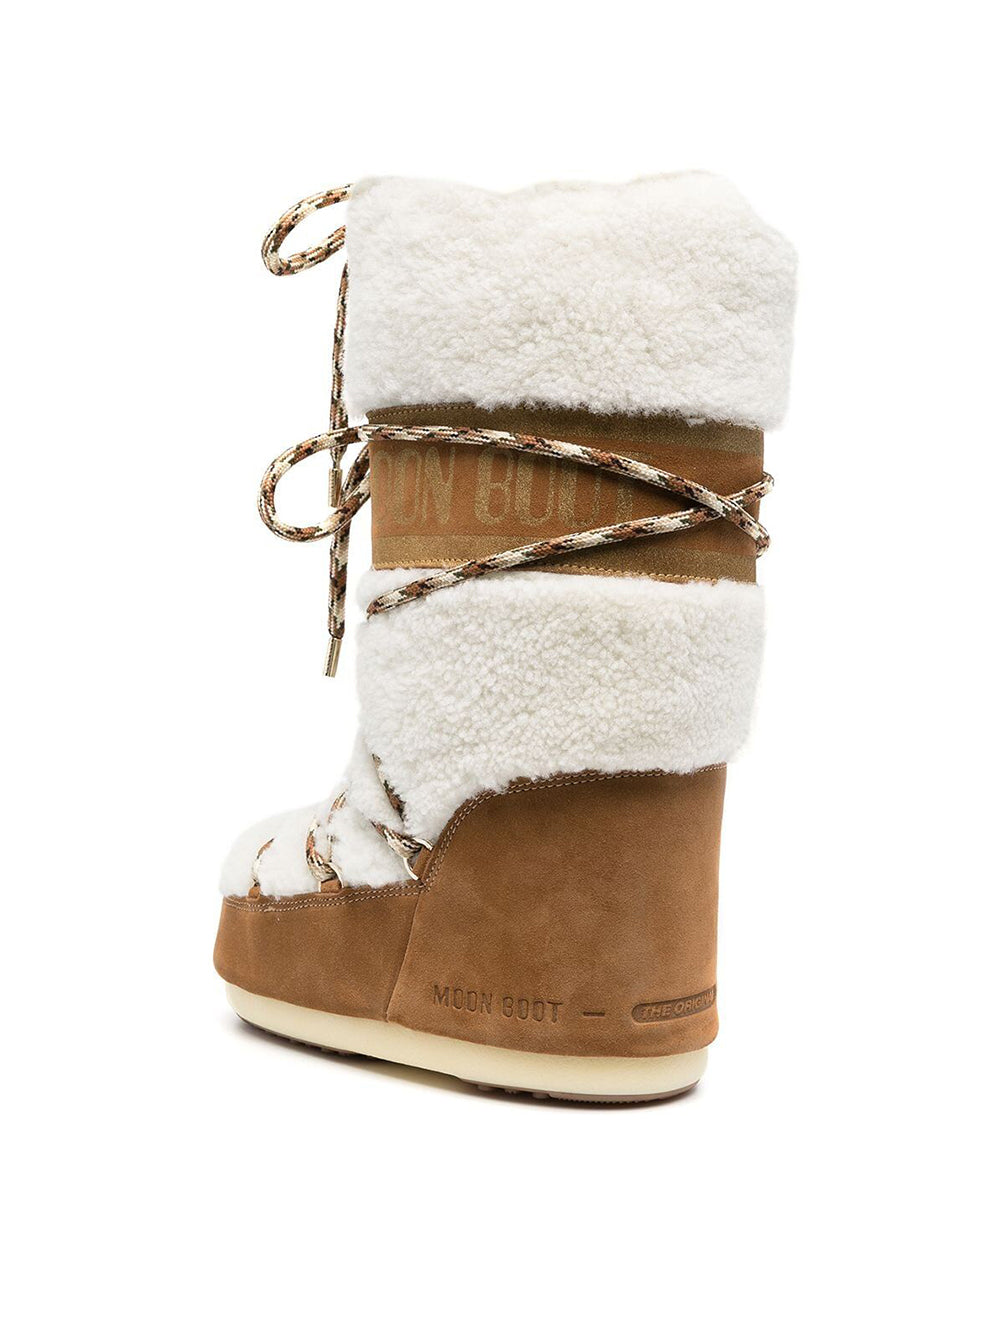 Icon shearling boot